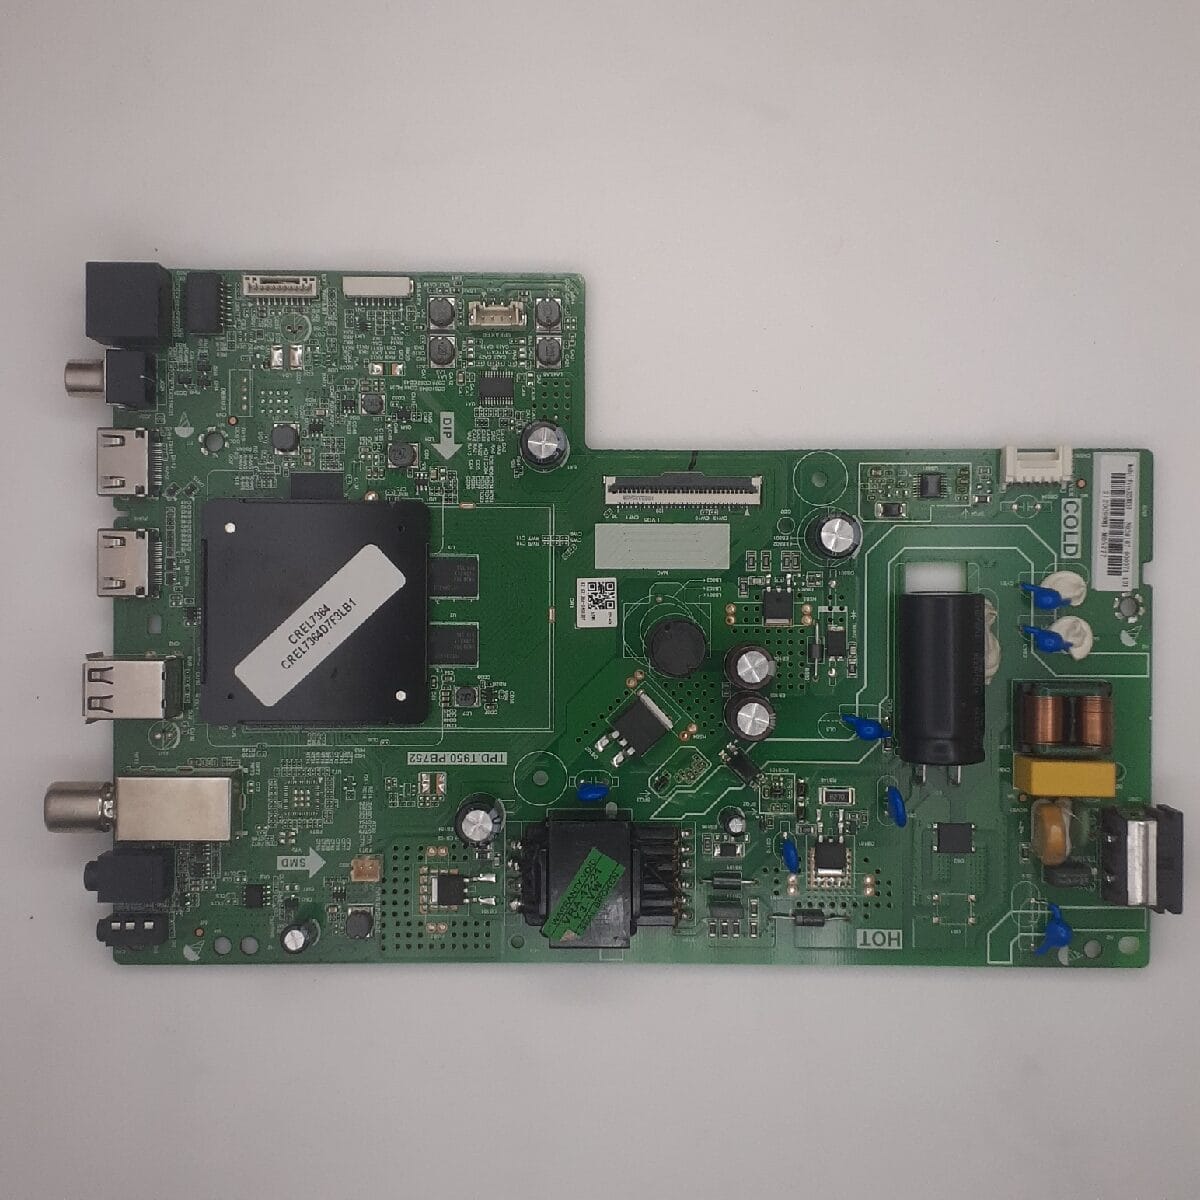 CREL7364 CROMA MOTHERBOARD FOR LED TV